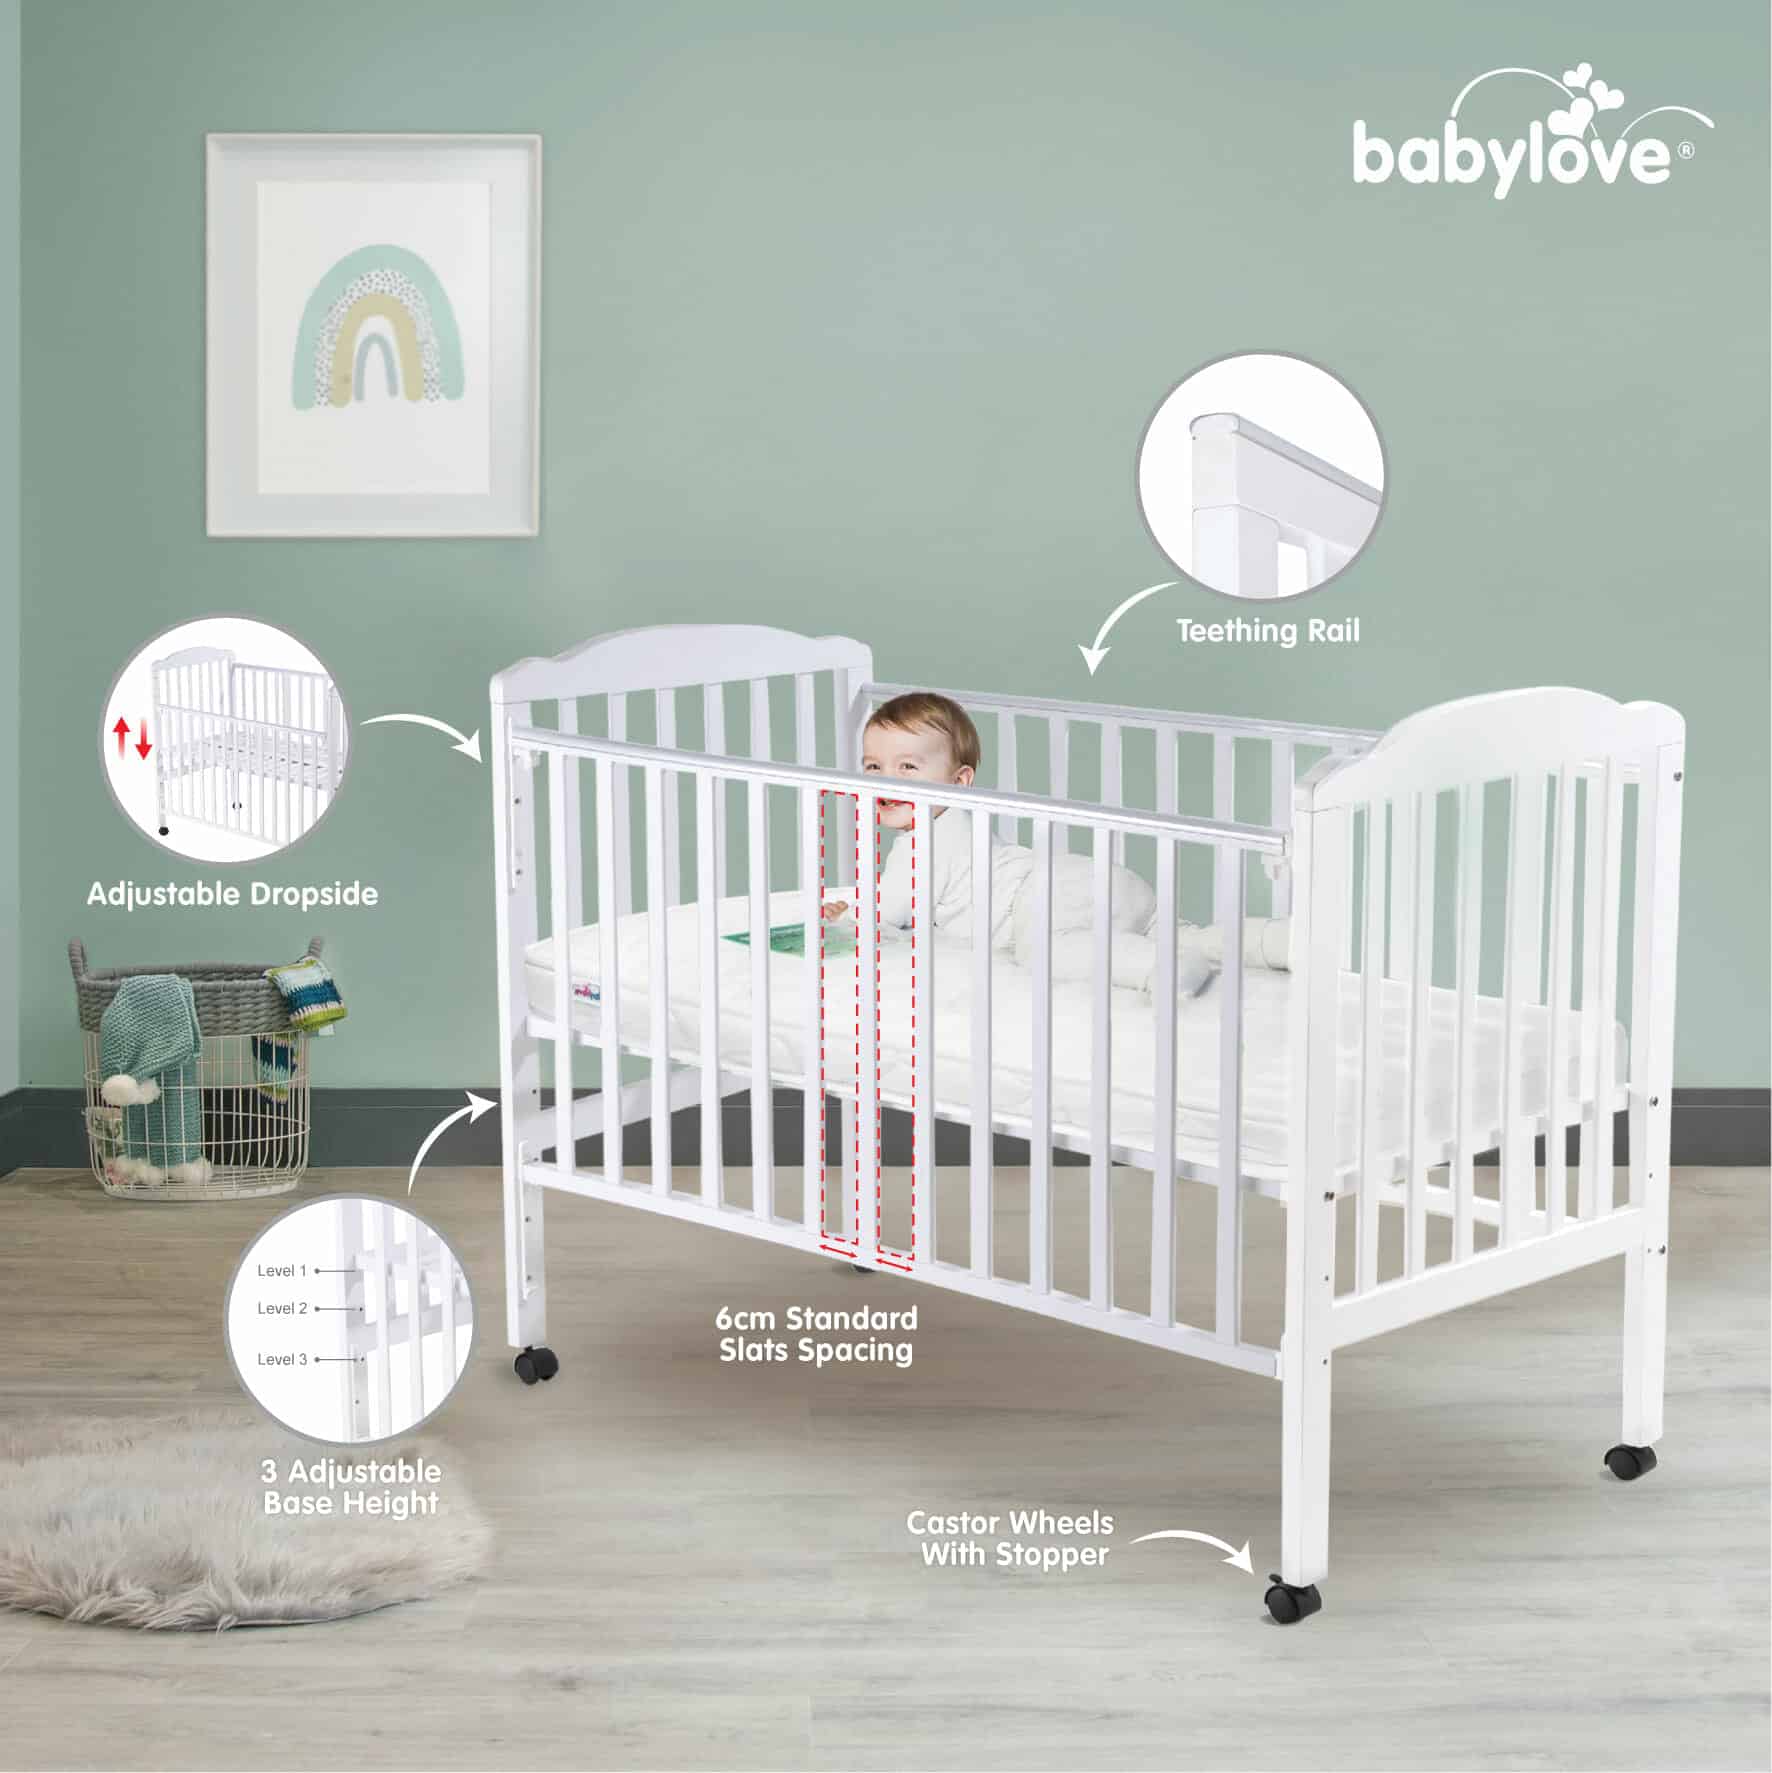 Babylove Best Basic Baby Cot - White / Natural